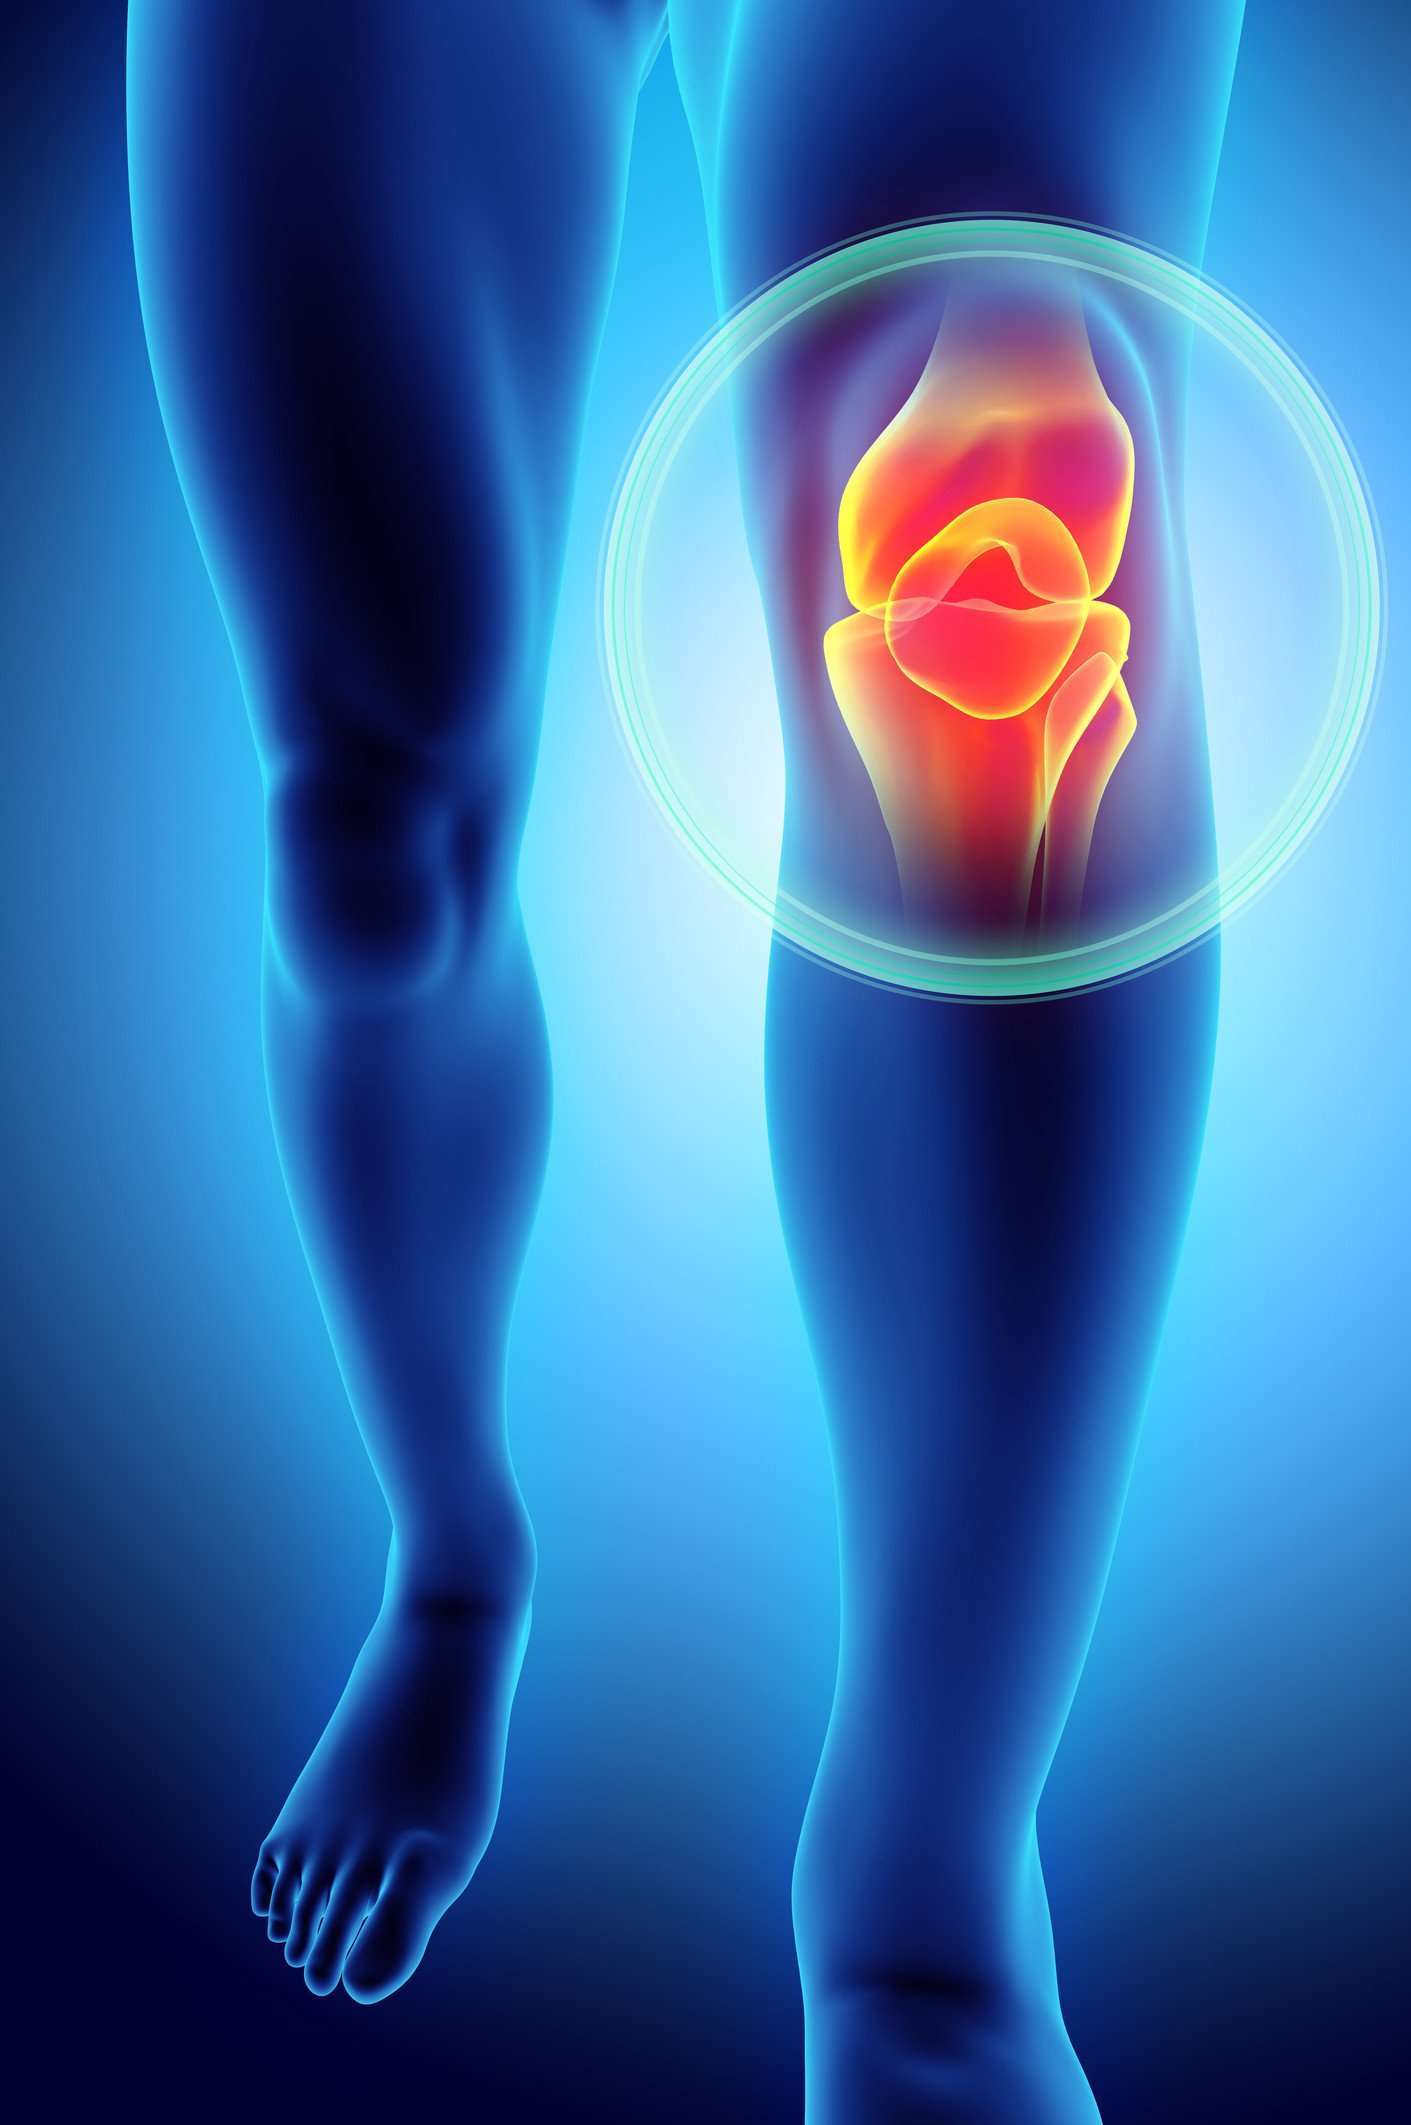 Can you virtually improve your knee pain?